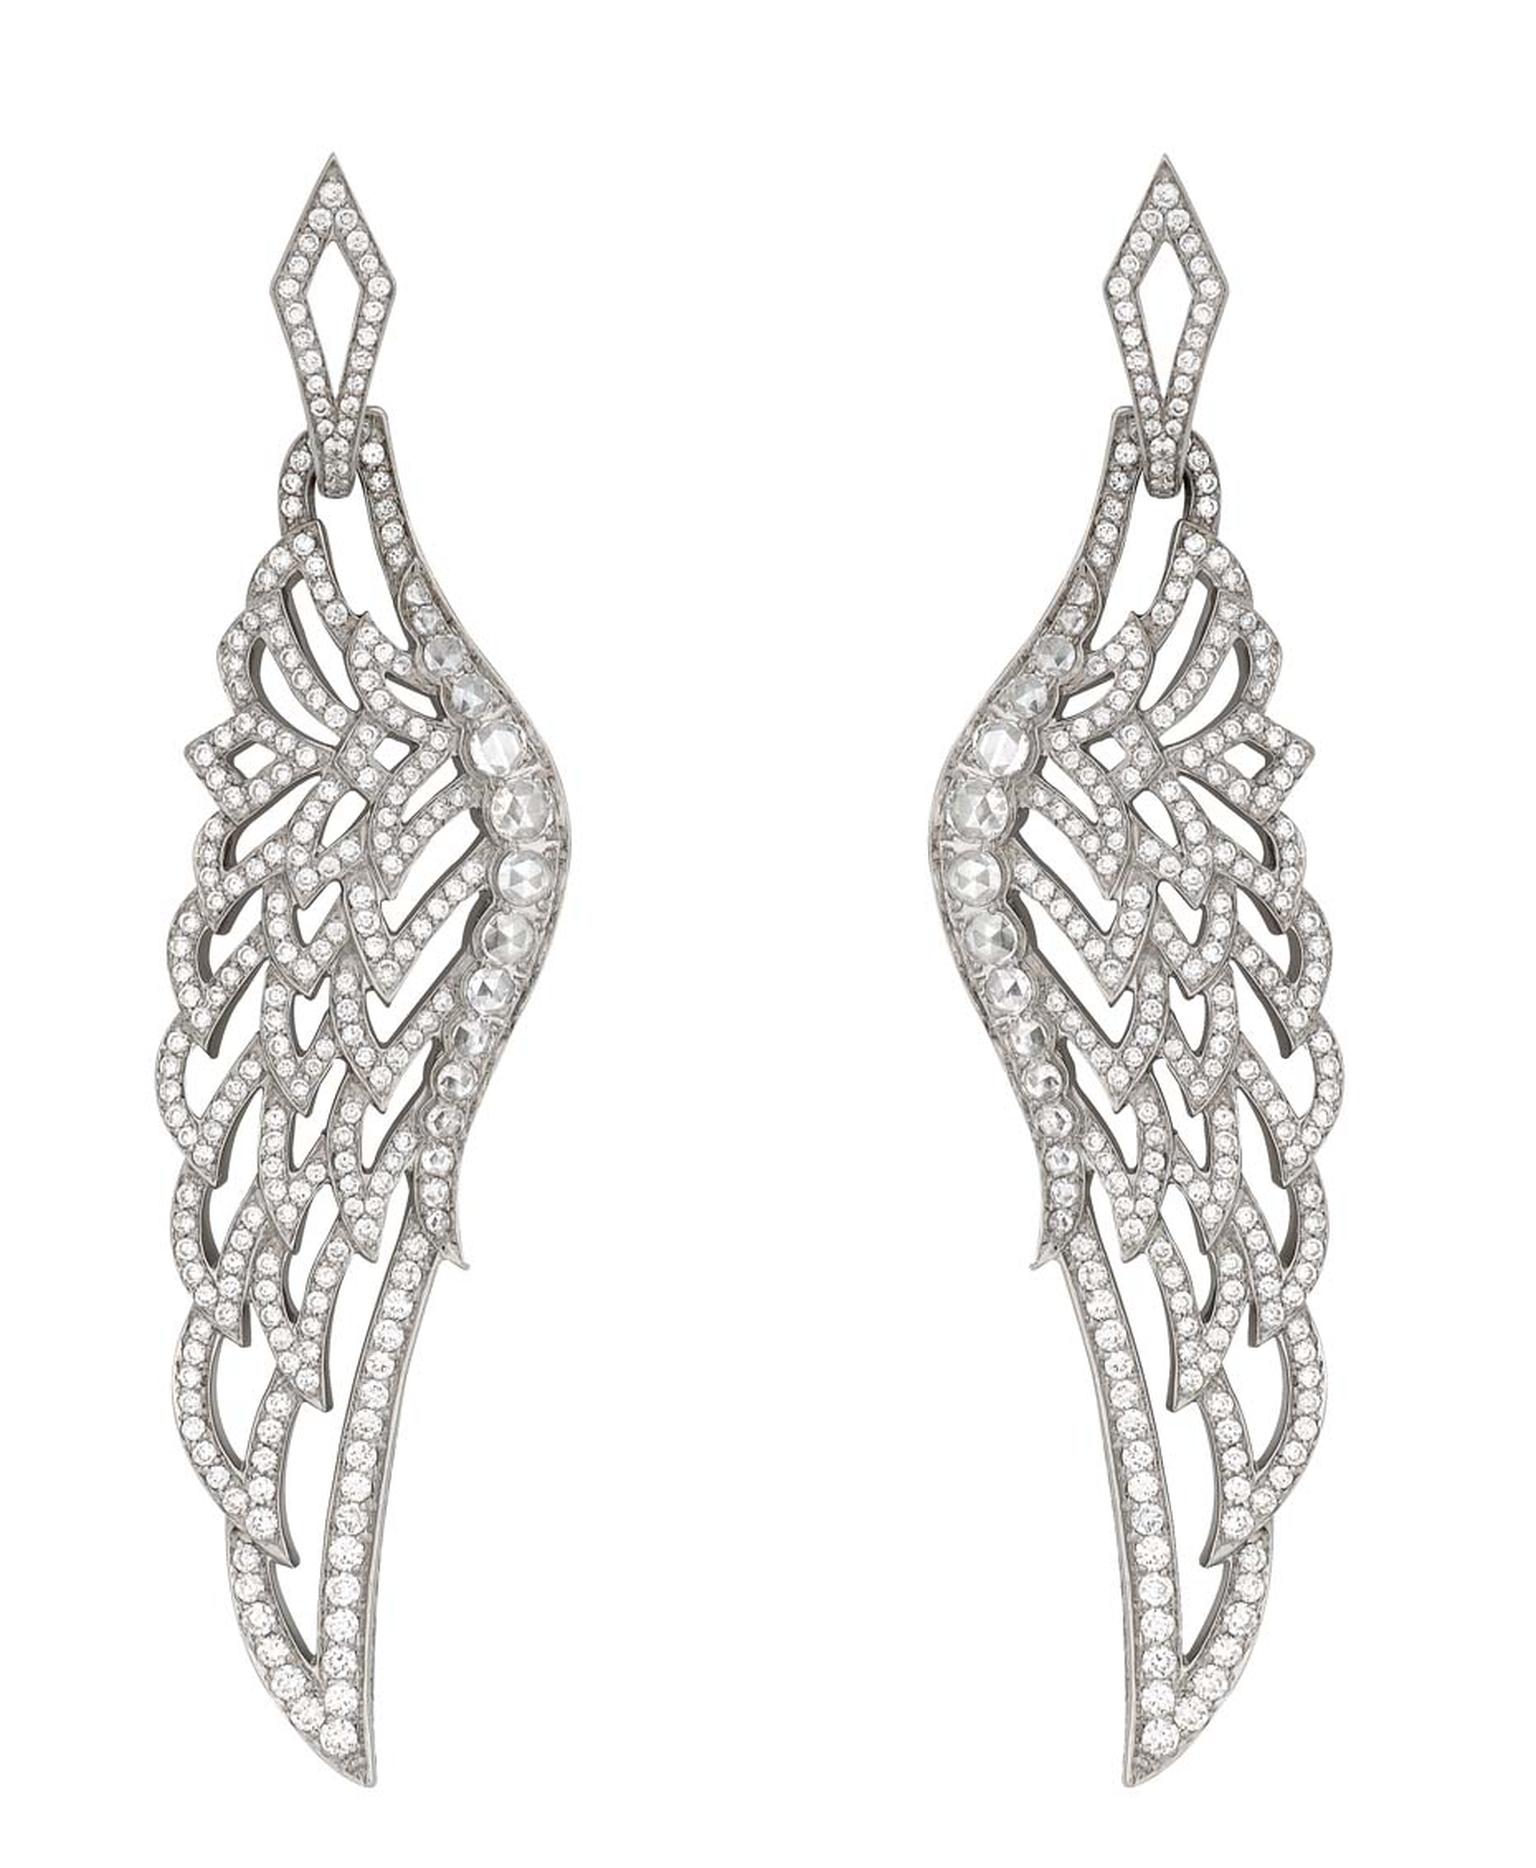 Garrard Wings 10th Anniversary collection white gold and diamond earrings.